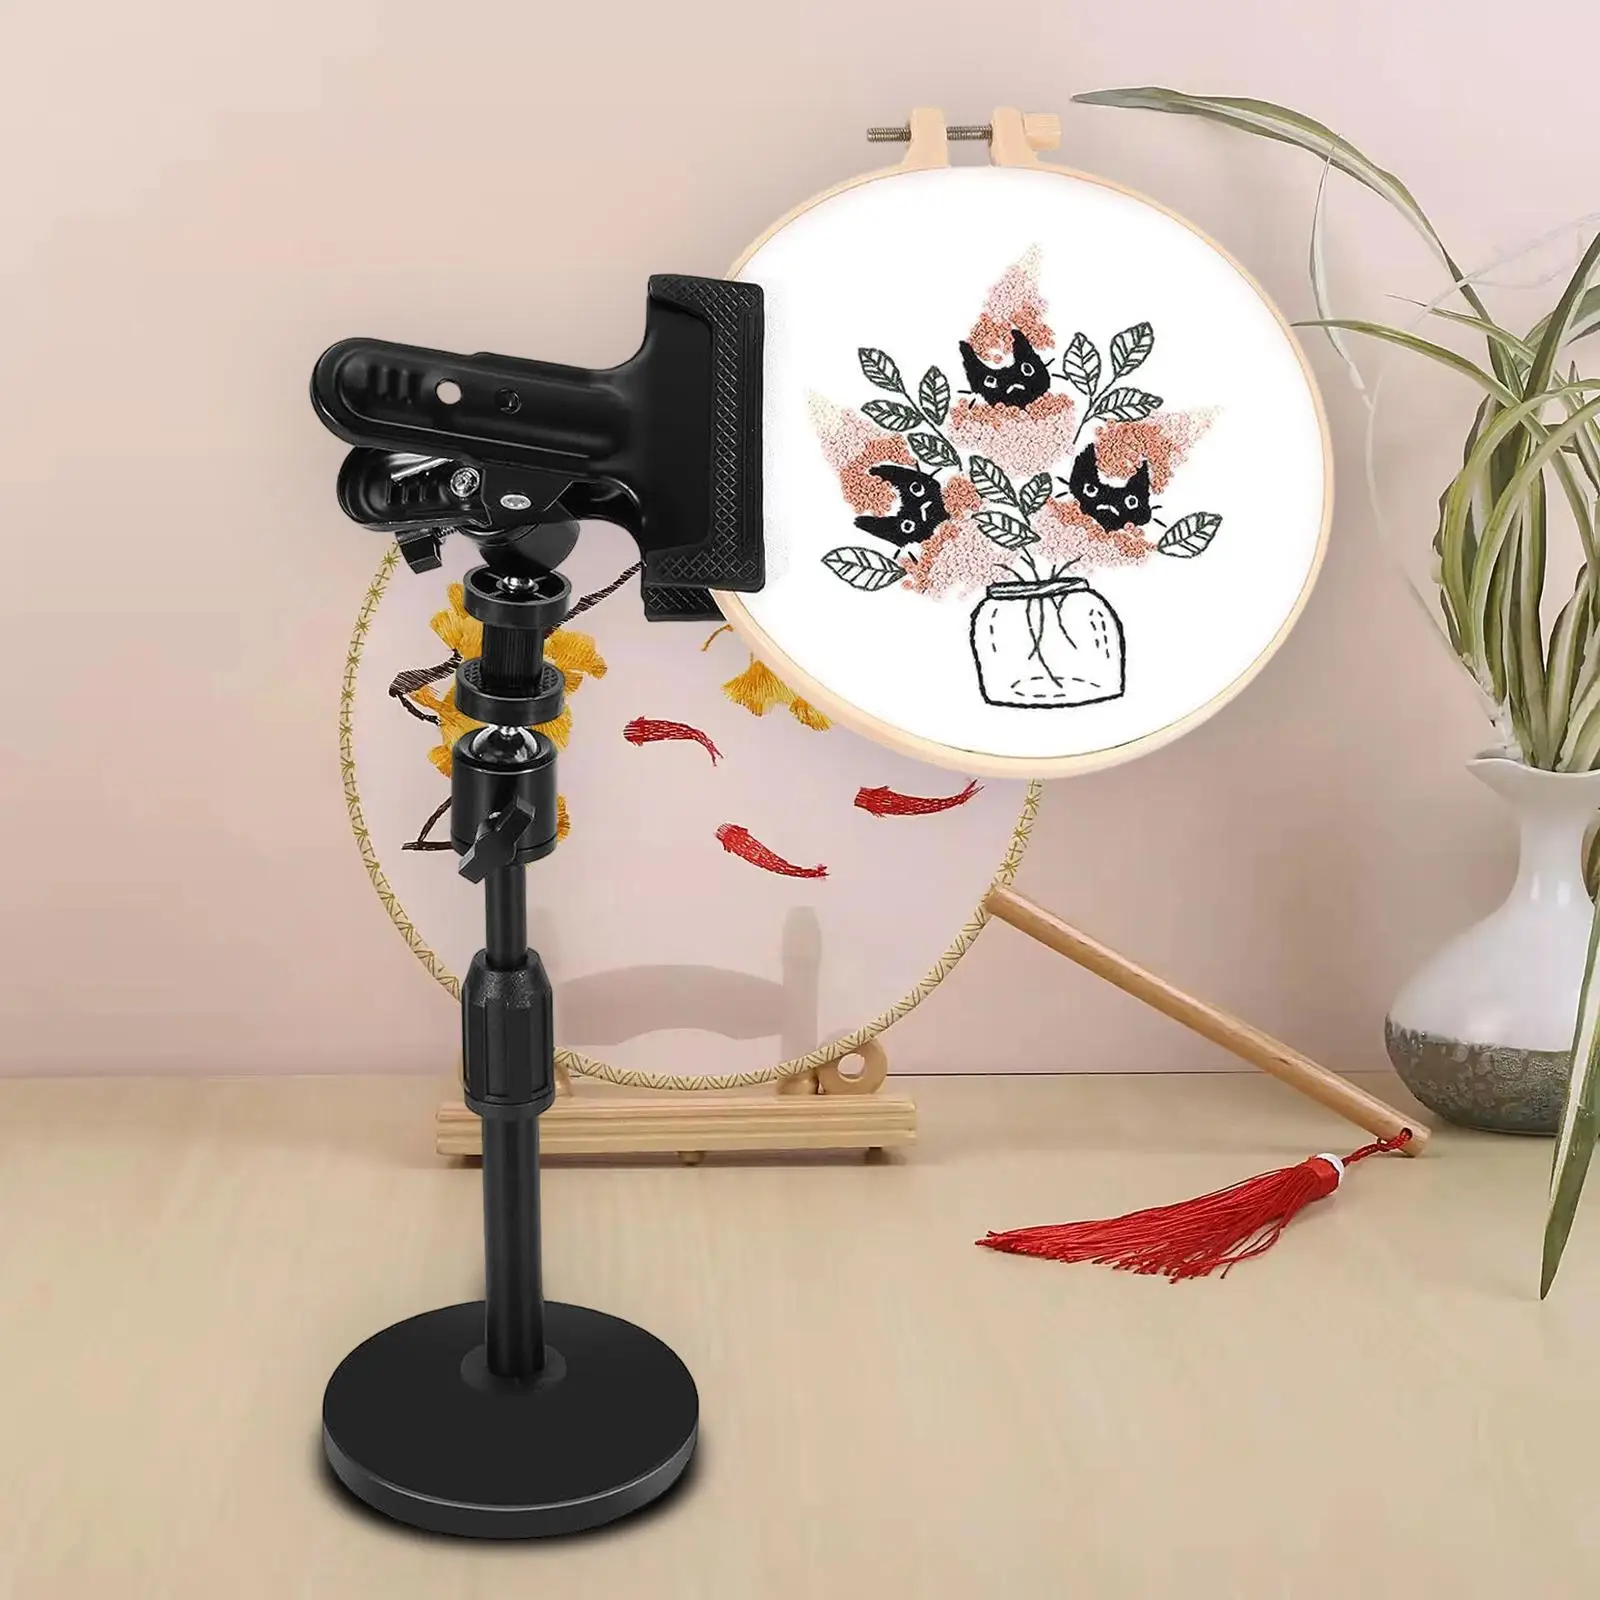 Embroidery Frame Holder Convenient Assemble Embroidery Hoop Stand for Quilting Silk Painting Embroidery Enthusiast Sewing Crafts